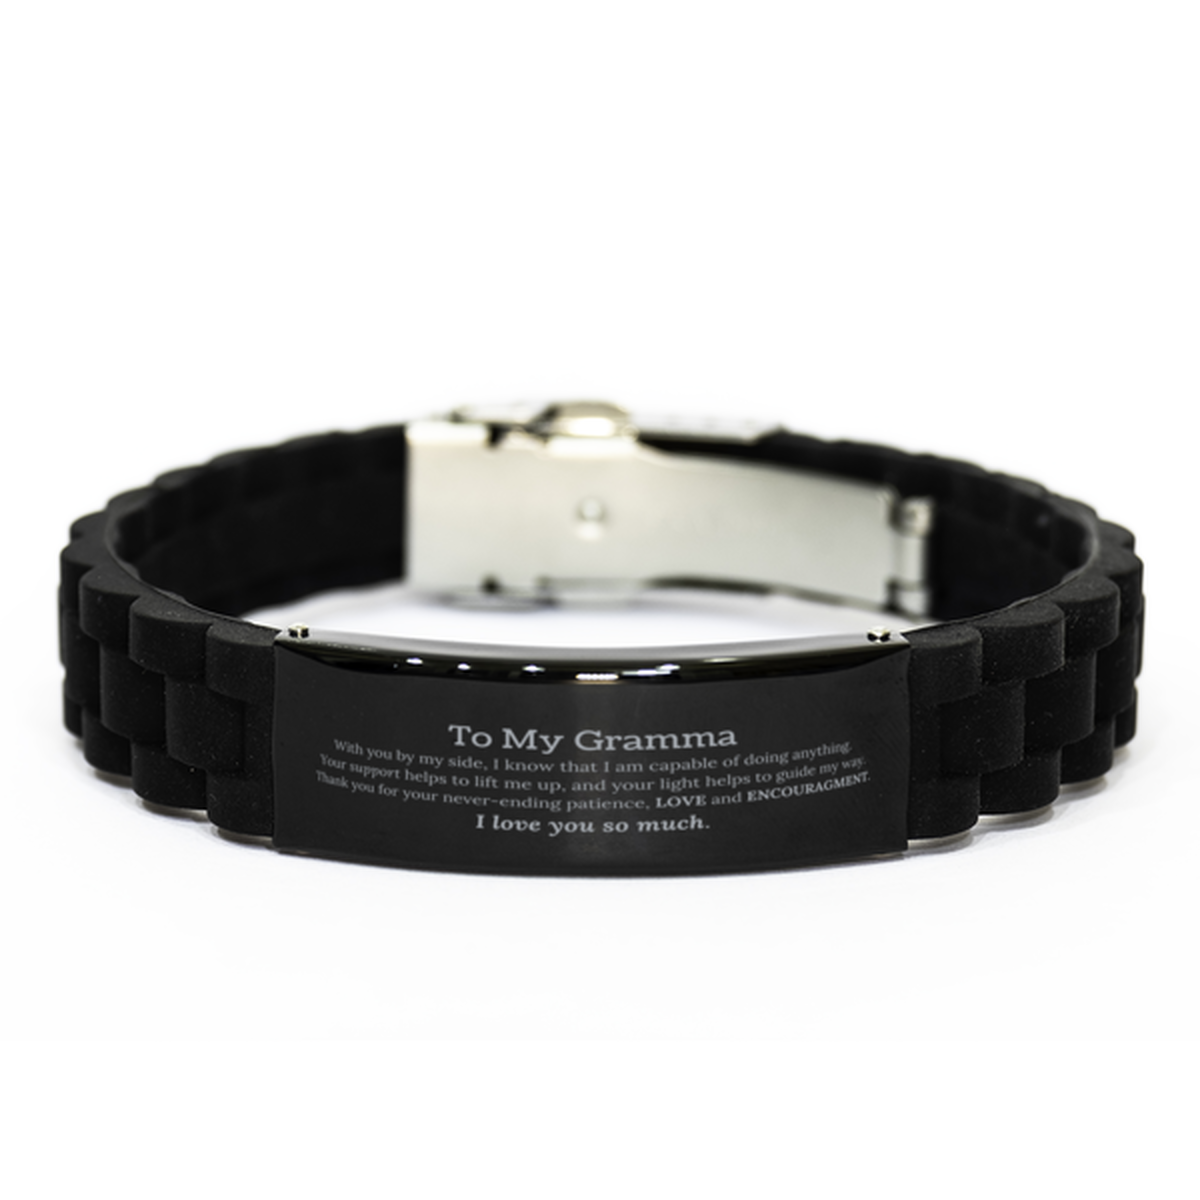 Appreciation Gramma Black Glidelock Clasp Bracelet Gifts, To My Gramma Birthday Christmas Wedding Keepsake Gifts for Gramma With you by my side, I know that I am capable of doing anything. I love you so much